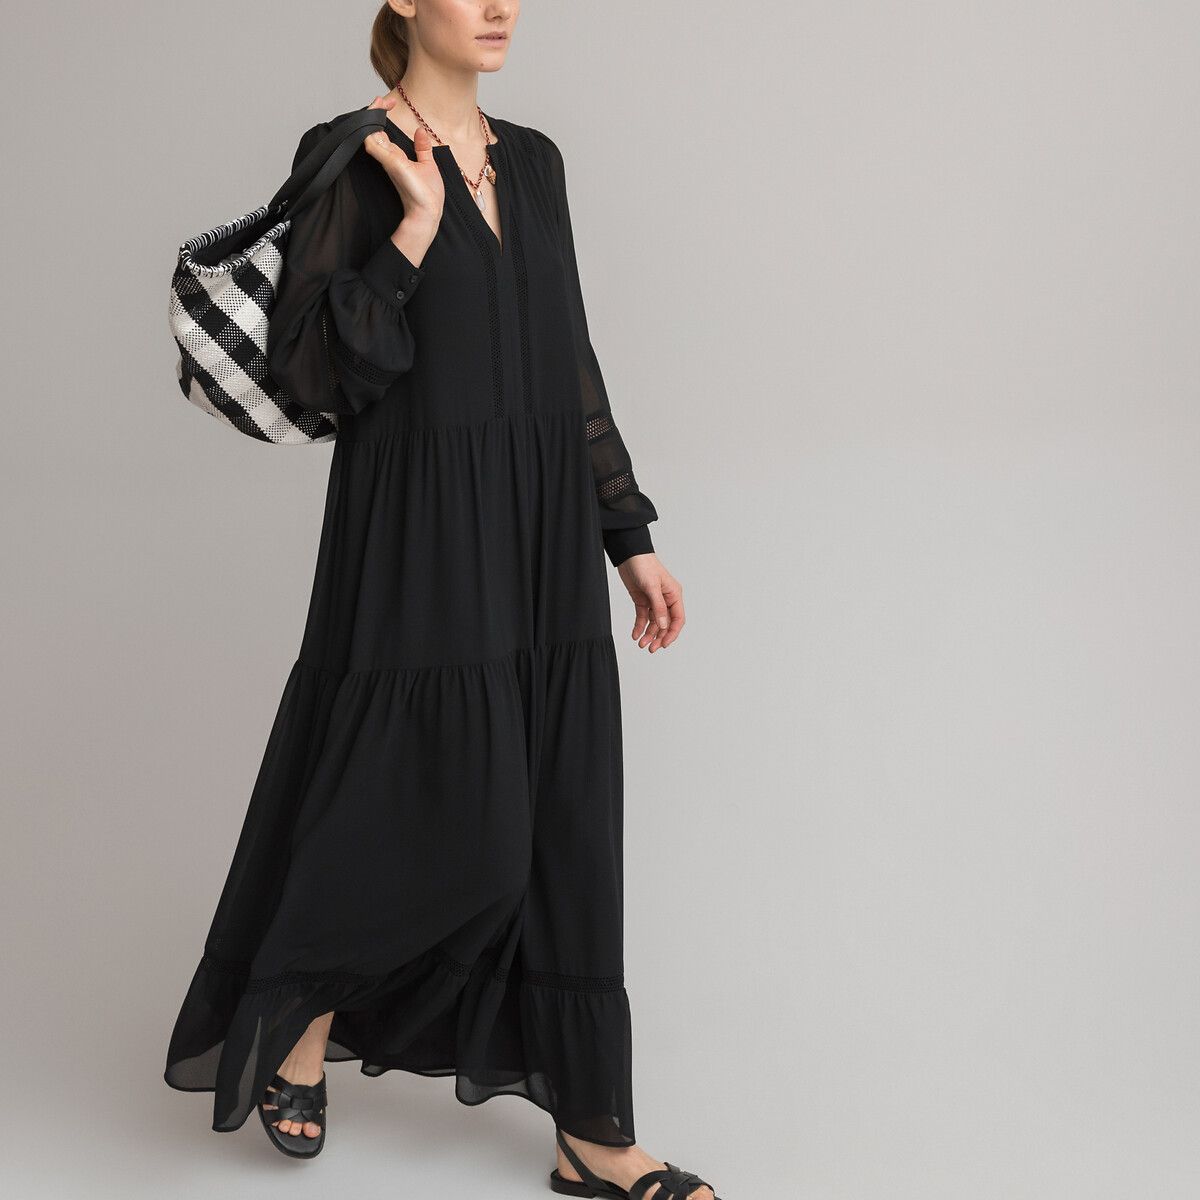 Recycled Tiered Maxi Dress with Long Voile Sleeves | La Redoute (UK)